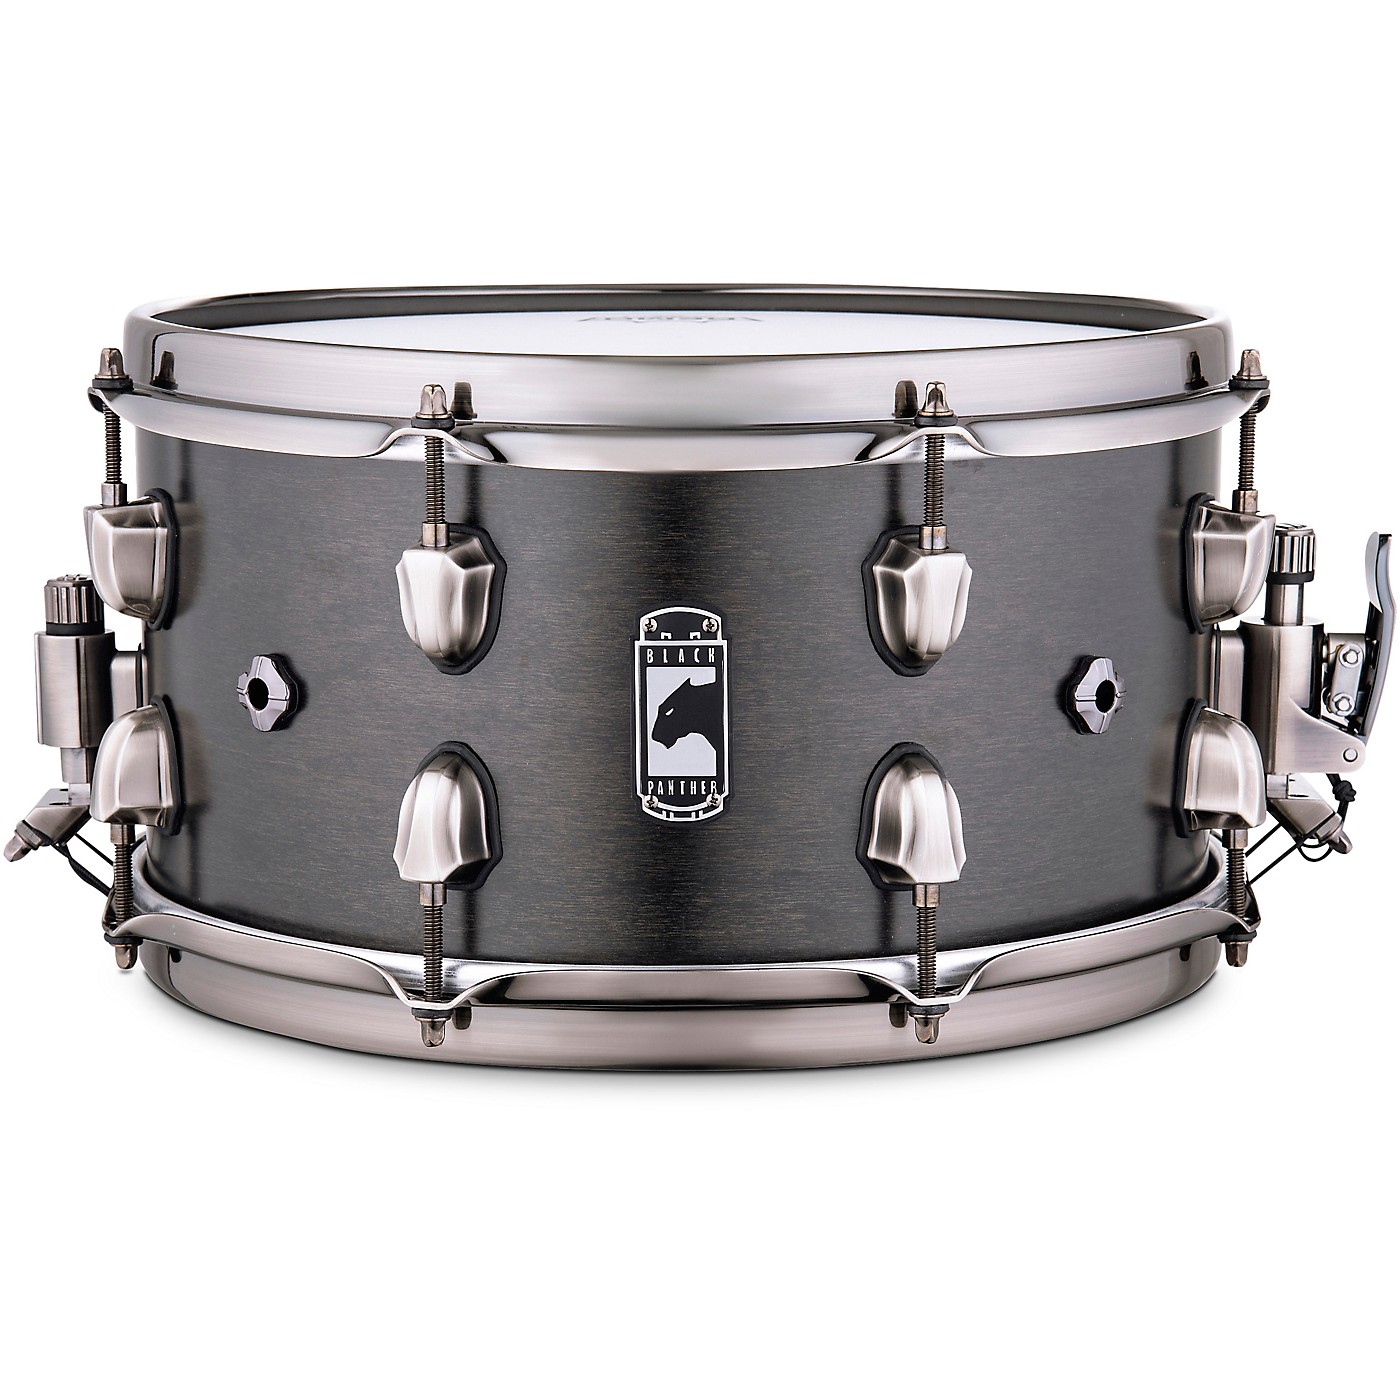 Mapex Black Panther Hydro Snare Drum thumbnail